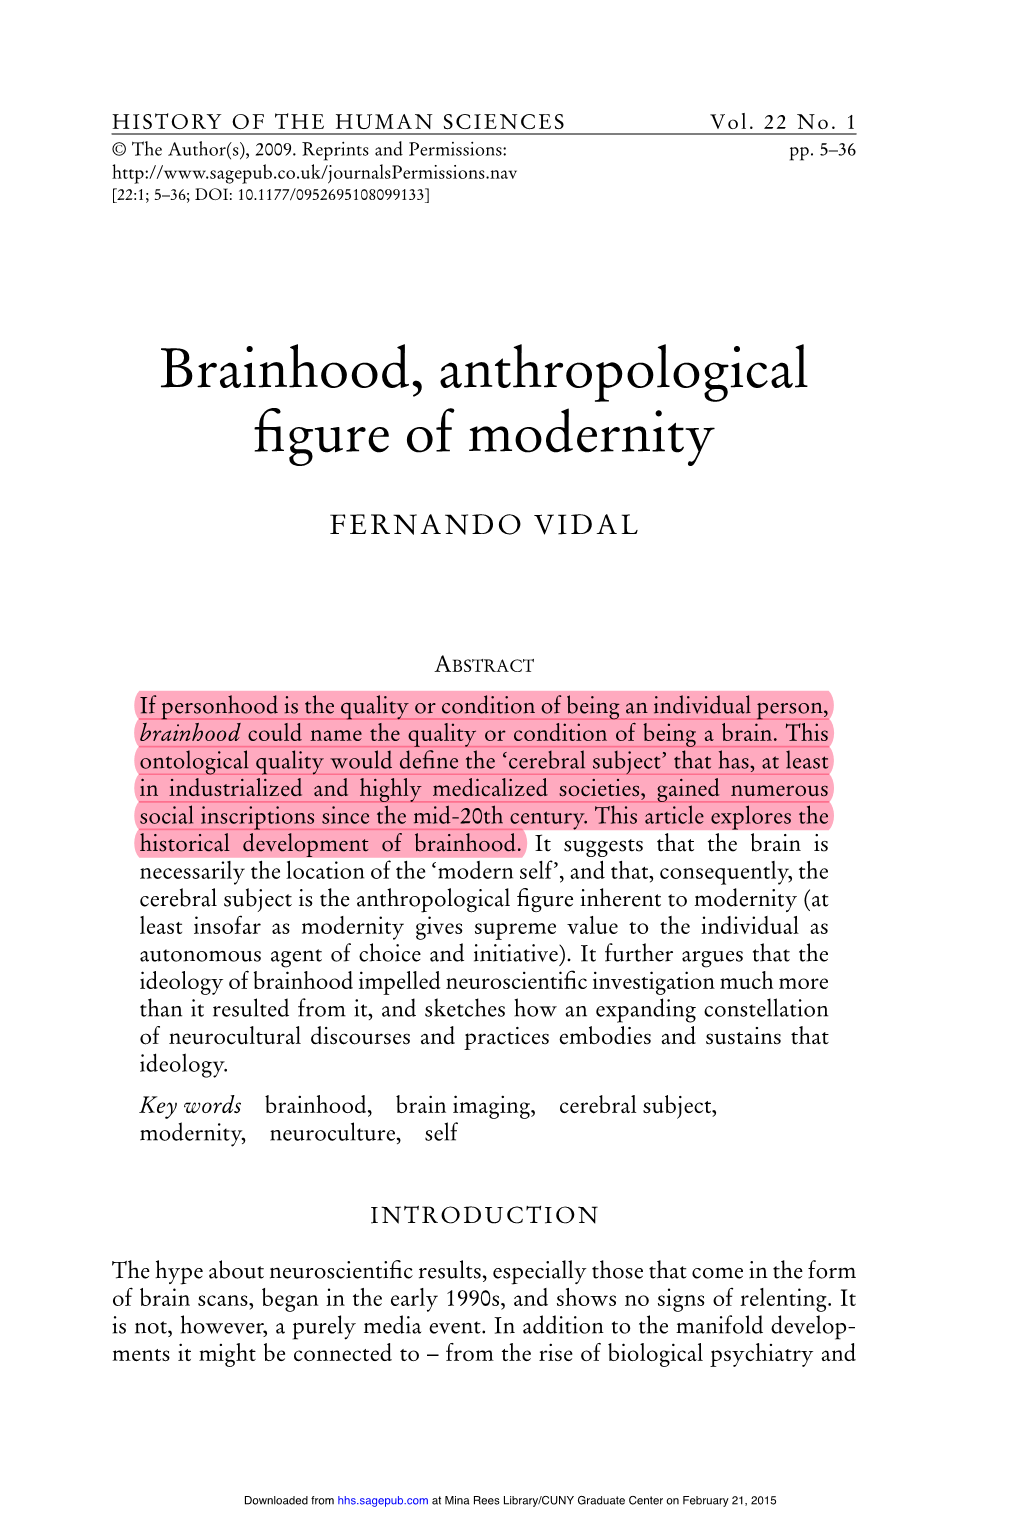 BRAINHOOD, ANTHROPOLOGICAL FIGURE of MODERNITY 7 to Support in Detail Such a Thesis, I Want to Suggest That It Makes Both Histori- Cal and Conceptual Sense